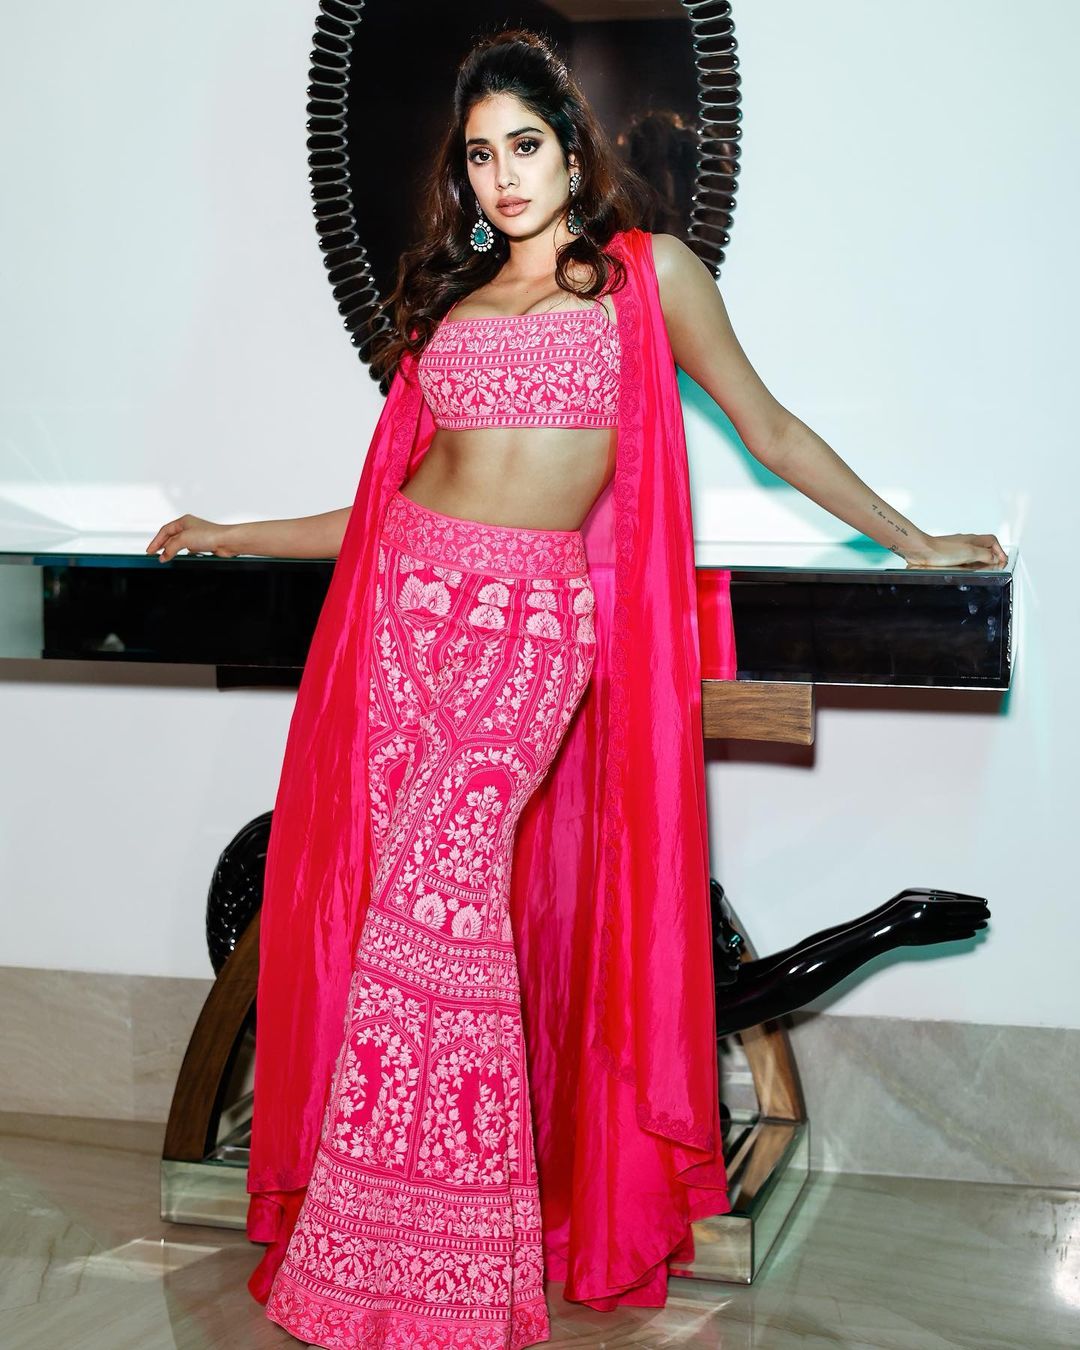 Janhvi Kapoor is a vision to behold in the pink Indo-western co-ord set